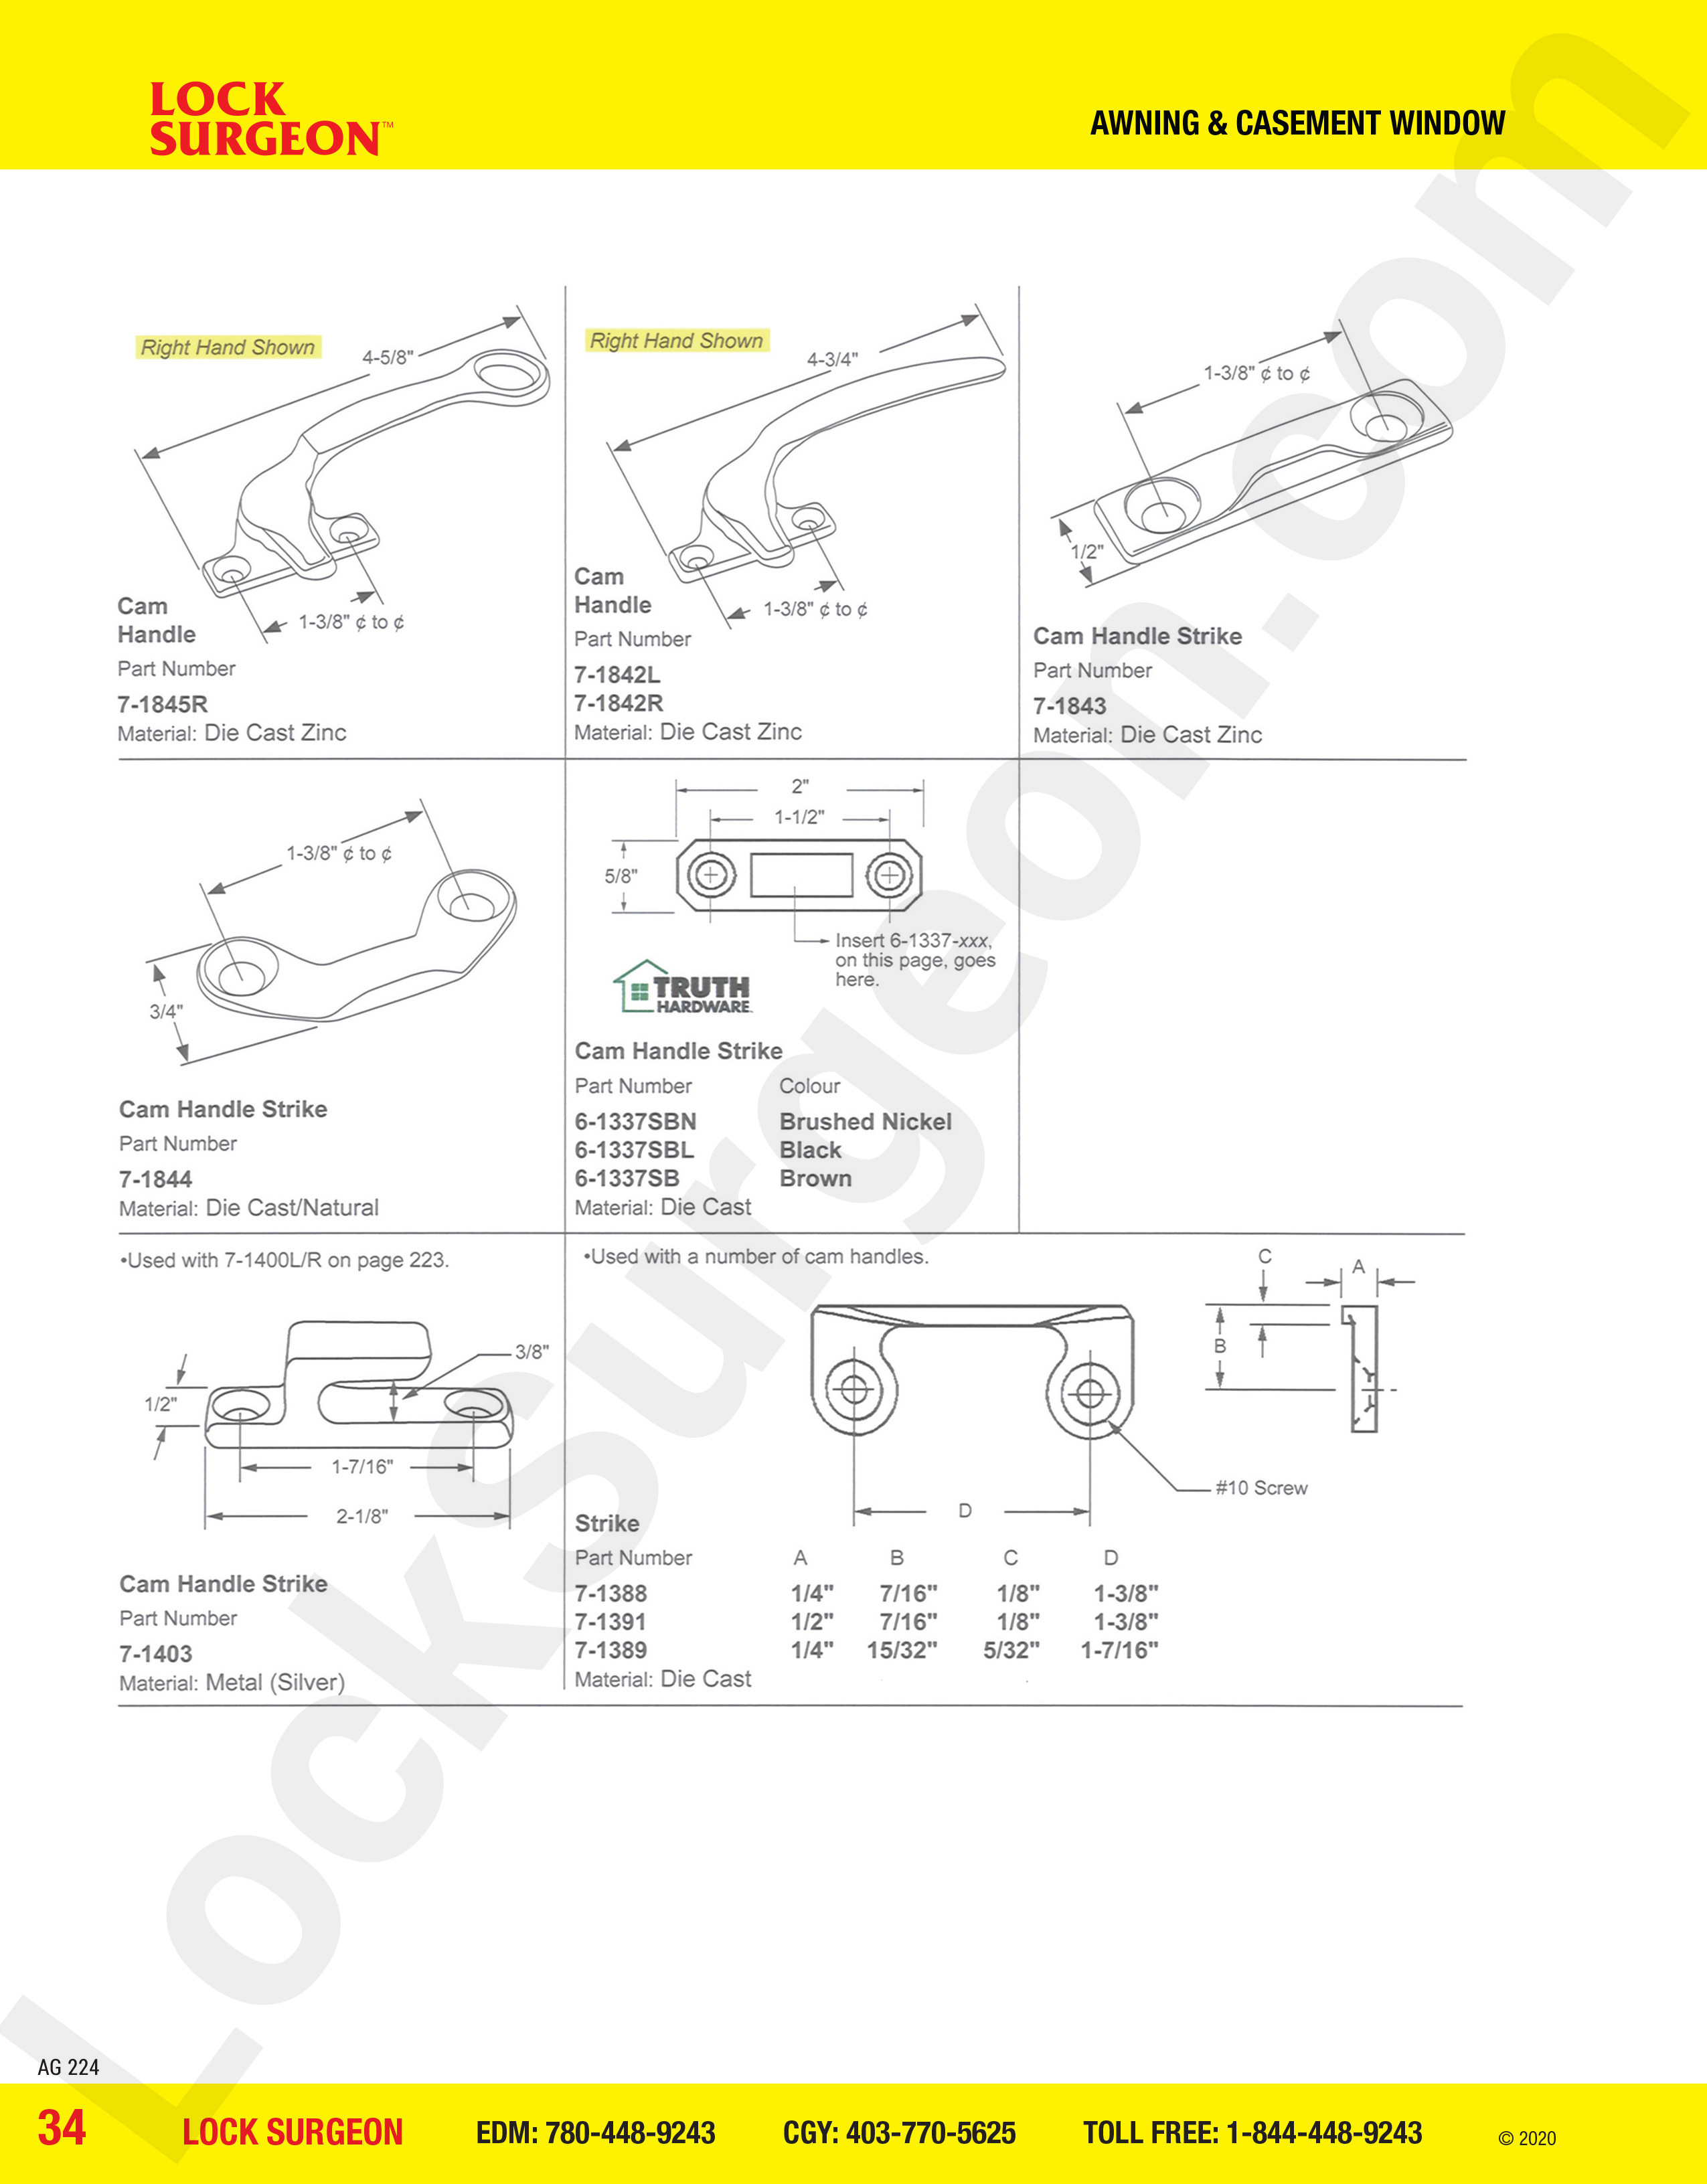 awning and casement window parts for cam handle strikes Acheson mobile